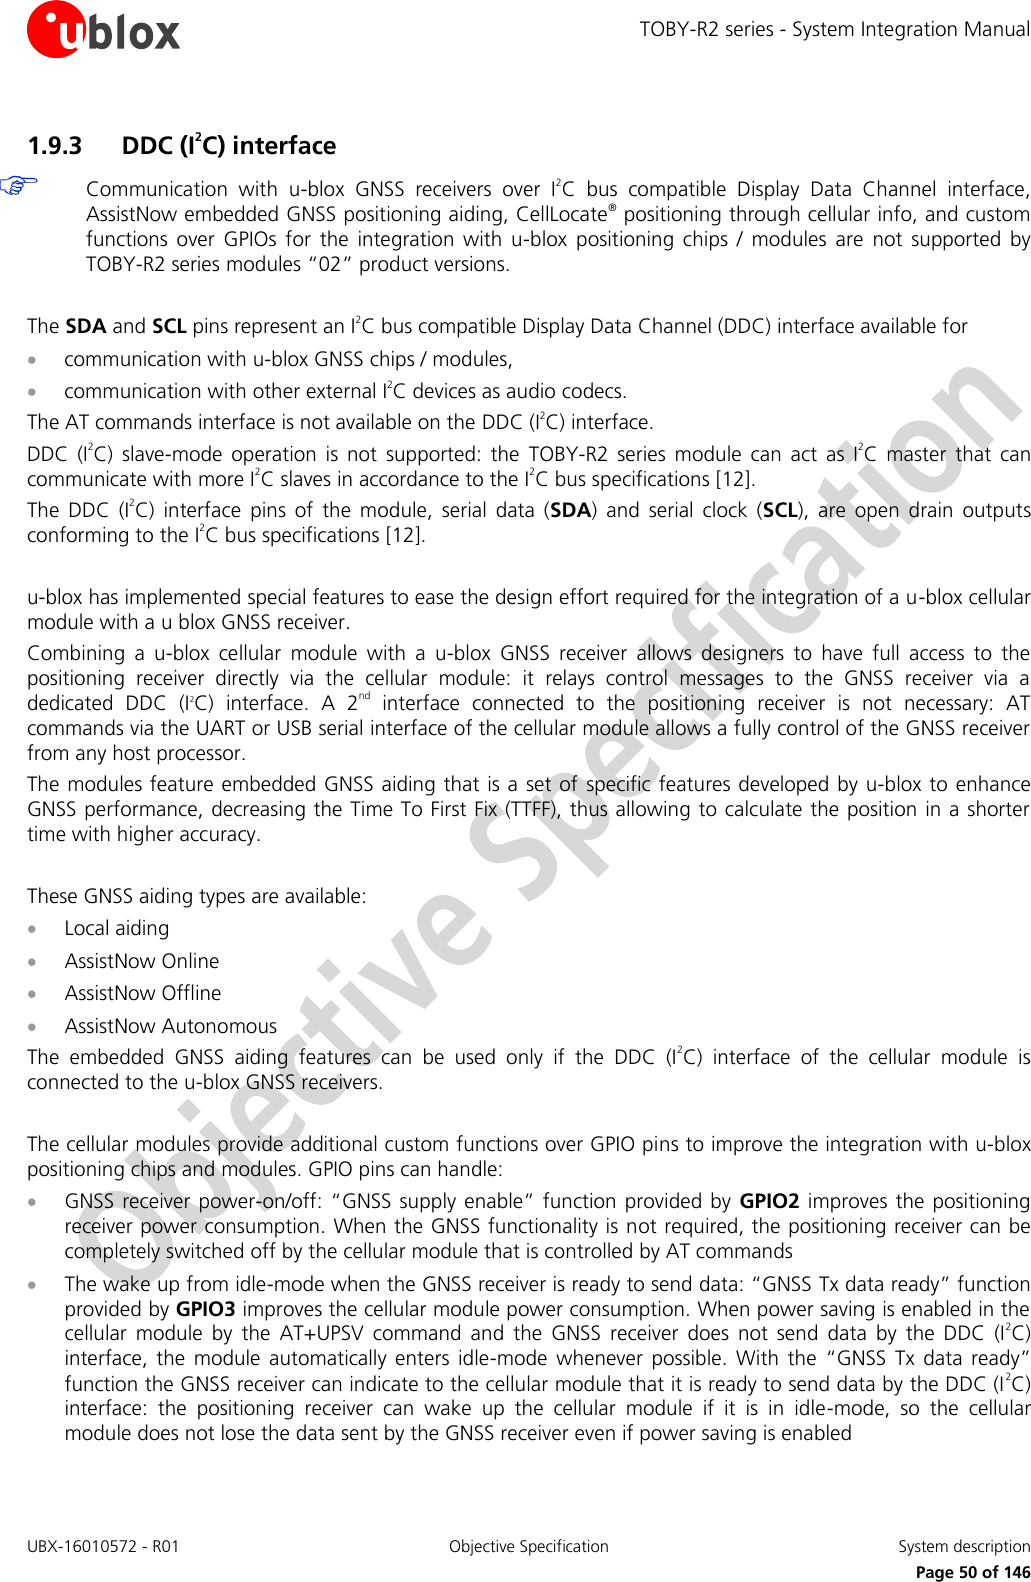 TOBY-R2 series - System Integration Manual UBX-16010572 - R01  Objective Specification  System description     Page 50 of 146 1.9.3 DDC (I2C) interface  Communication  with  u-blox  GNSS  receivers  over  I2C  bus  compatible  Display  Data  Channel  interface, AssistNow embedded GNSS positioning aiding, CellLocate® positioning through cellular info, and custom functions  over  GPIOs  for  the  integration  with  u-blox  positioning  chips  /  modules  are  not  supported  by TOBY-R2 series modules “02” product versions.  The SDA and SCL pins represent an I2C bus compatible Display Data Channel (DDC) interface available for   communication with u-blox GNSS chips / modules,  communication with other external I2C devices as audio codecs. The AT commands interface is not available on the DDC (I2C) interface. DDC  (I2C)  slave-mode  operation  is  not  supported:  the  TOBY-R2  series  module  can  act  as  I2C  master  that  can communicate with more I2C slaves in accordance to the I2C bus specifications [12]. The  DDC  (I2C)  interface  pins  of  the  module,  serial  data  (SDA)  and  serial  clock  (SCL),  are  open  drain  outputs conforming to the I2C bus specifications [12].  u-blox has implemented special features to ease the design effort required for the integration of a u-blox cellular module with a u blox GNSS receiver. Combining  a  u-blox  cellular  module  with  a  u-blox  GNSS  receiver  allows  designers  to  have  full  access  to  the positioning  receiver  directly  via  the  cellular  module:  it  relays  control  messages  to  the  GNSS  receiver  via  a dedicated  DDC  (I2C)  interface.  A  2nd  interface  connected  to  the  positioning  receiver  is  not  necessary:  AT commands via the UART or USB serial interface of the cellular module allows a fully control of the GNSS receiver from any host processor. The modules feature embedded GNSS aiding that is a  set of specific features developed by u-blox to enhance GNSS performance, decreasing the Time To First Fix (TTFF), thus allowing to calculate the position in a shorter time with higher accuracy.  These GNSS aiding types are available:  Local aiding  AssistNow Online  AssistNow Offline  AssistNow Autonomous The  embedded  GNSS  aiding  features  can  be  used  only  if  the  DDC  (I2C)  interface  of  the  cellular  module  is connected to the u-blox GNSS receivers.  The cellular modules provide additional custom functions over GPIO pins to improve the integration with u-blox positioning chips and modules. GPIO pins can handle:  GNSS receiver  power-on/off:  “GNSS  supply enable” function  provided by  GPIO2 improves the positioning receiver power consumption. When the GNSS functionality is not required, the positioning receiver can be completely switched off by the cellular module that is controlled by AT commands  The wake up from idle-mode when the GNSS receiver is ready to send data: “GNSS Tx data ready” function provided by GPIO3 improves the cellular module power consumption. When power saving is enabled in the cellular  module  by  the  AT+UPSV  command  and  the  GNSS  receiver  does  not  send  data  by  the  DDC  (I2C) interface,  the  module automatically  enters  idle-mode  whenever  possible.  With  the  “GNSS  Tx  data ready” function the GNSS receiver can indicate to the cellular module that it is ready to send data by the DDC (I2C) interface:  the  positioning  receiver  can  wake  up  the  cellular  module  if  it  is  in  idle-mode,  so  the  cellular module does not lose the data sent by the GNSS receiver even if power saving is enabled 